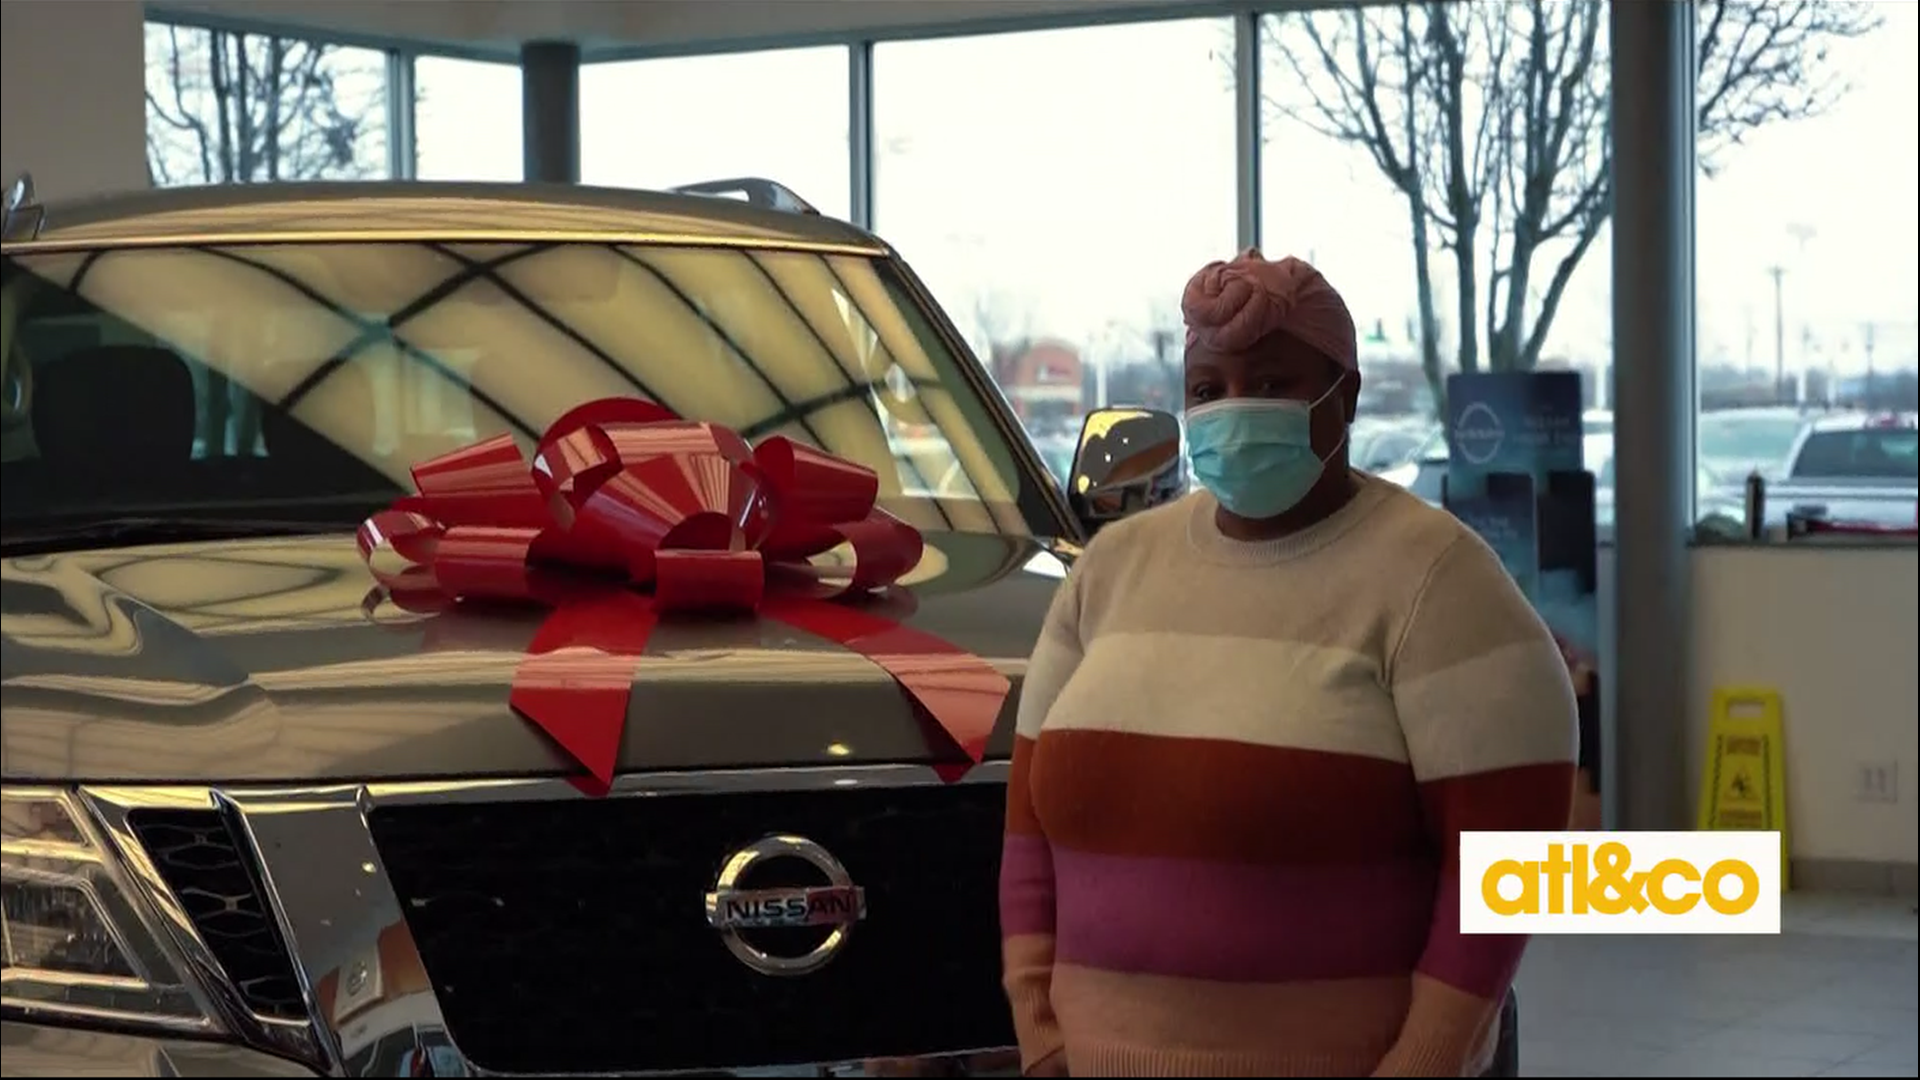 Preschool director Renee Dixon took on extra jobs to get her young students Christmas gifts. The local car dealer had a surprise of their own for the kind teacher!